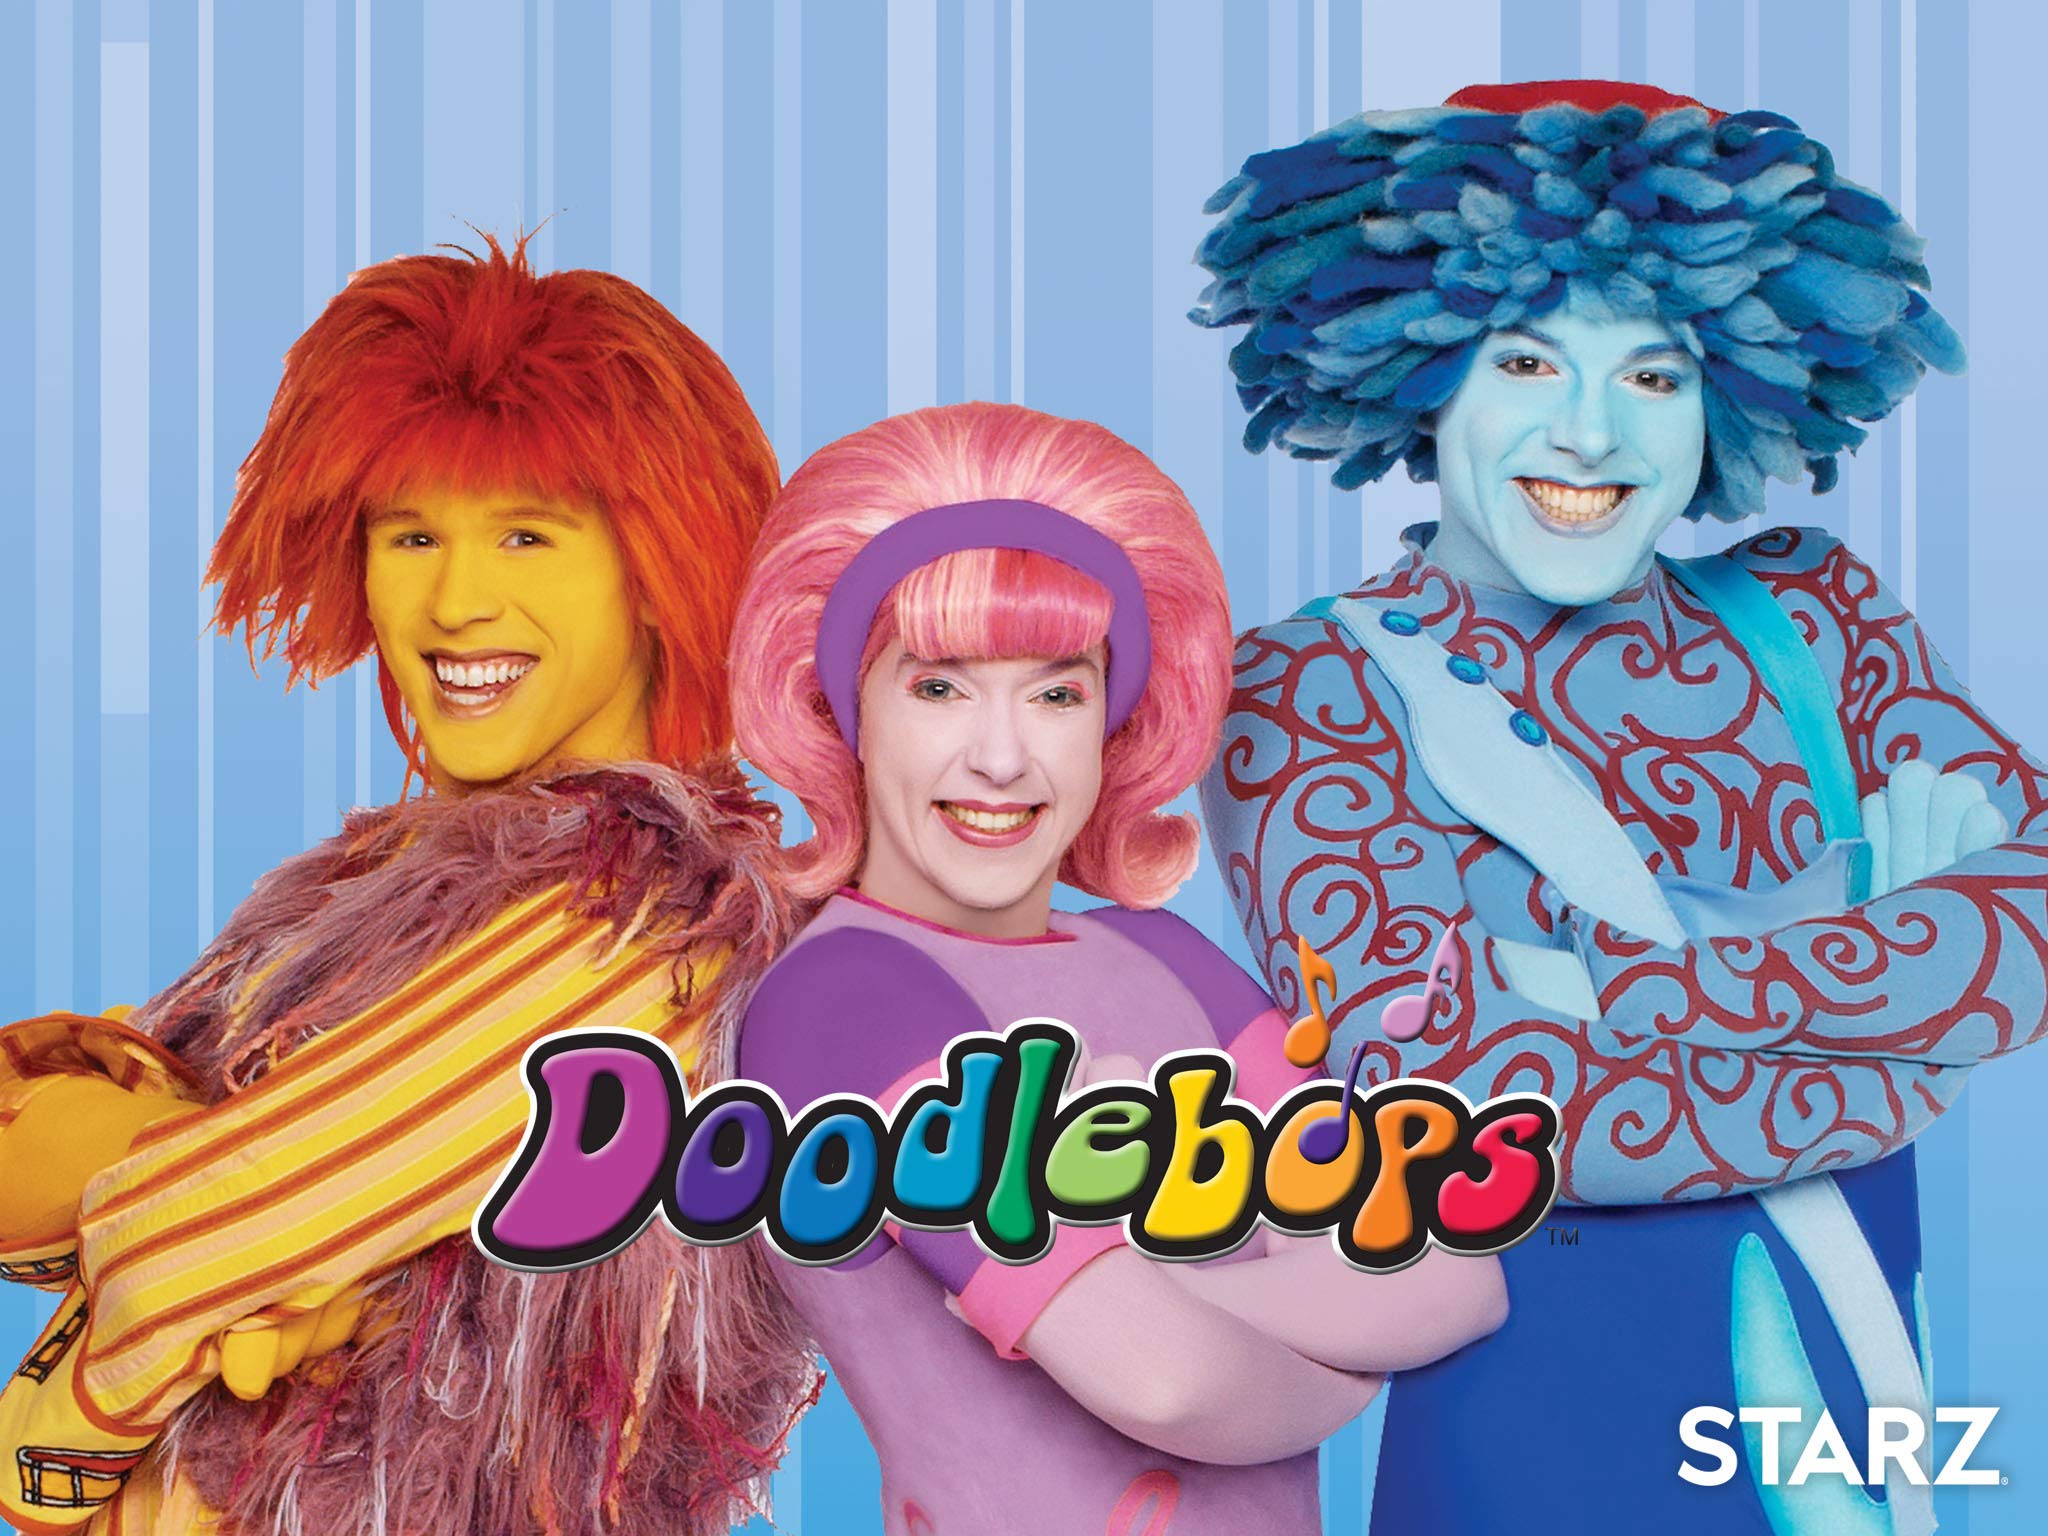 Amazon Watch The Doodlebops Prime Video